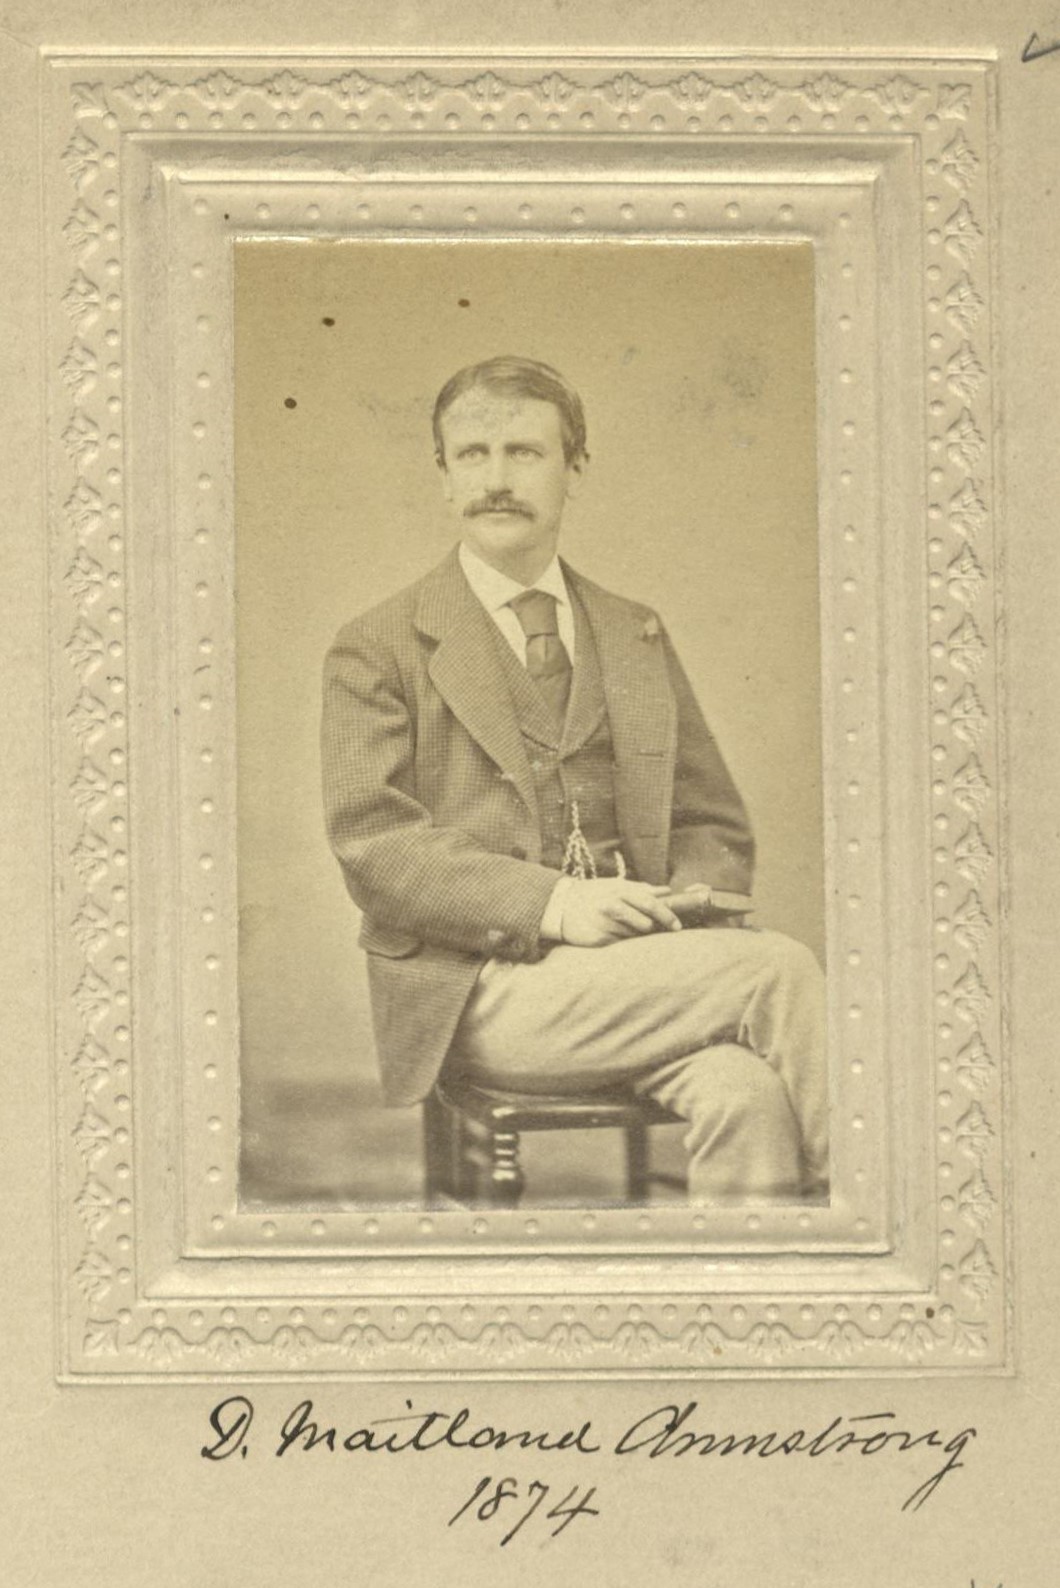 Member portrait of D. Maitland Armstrong